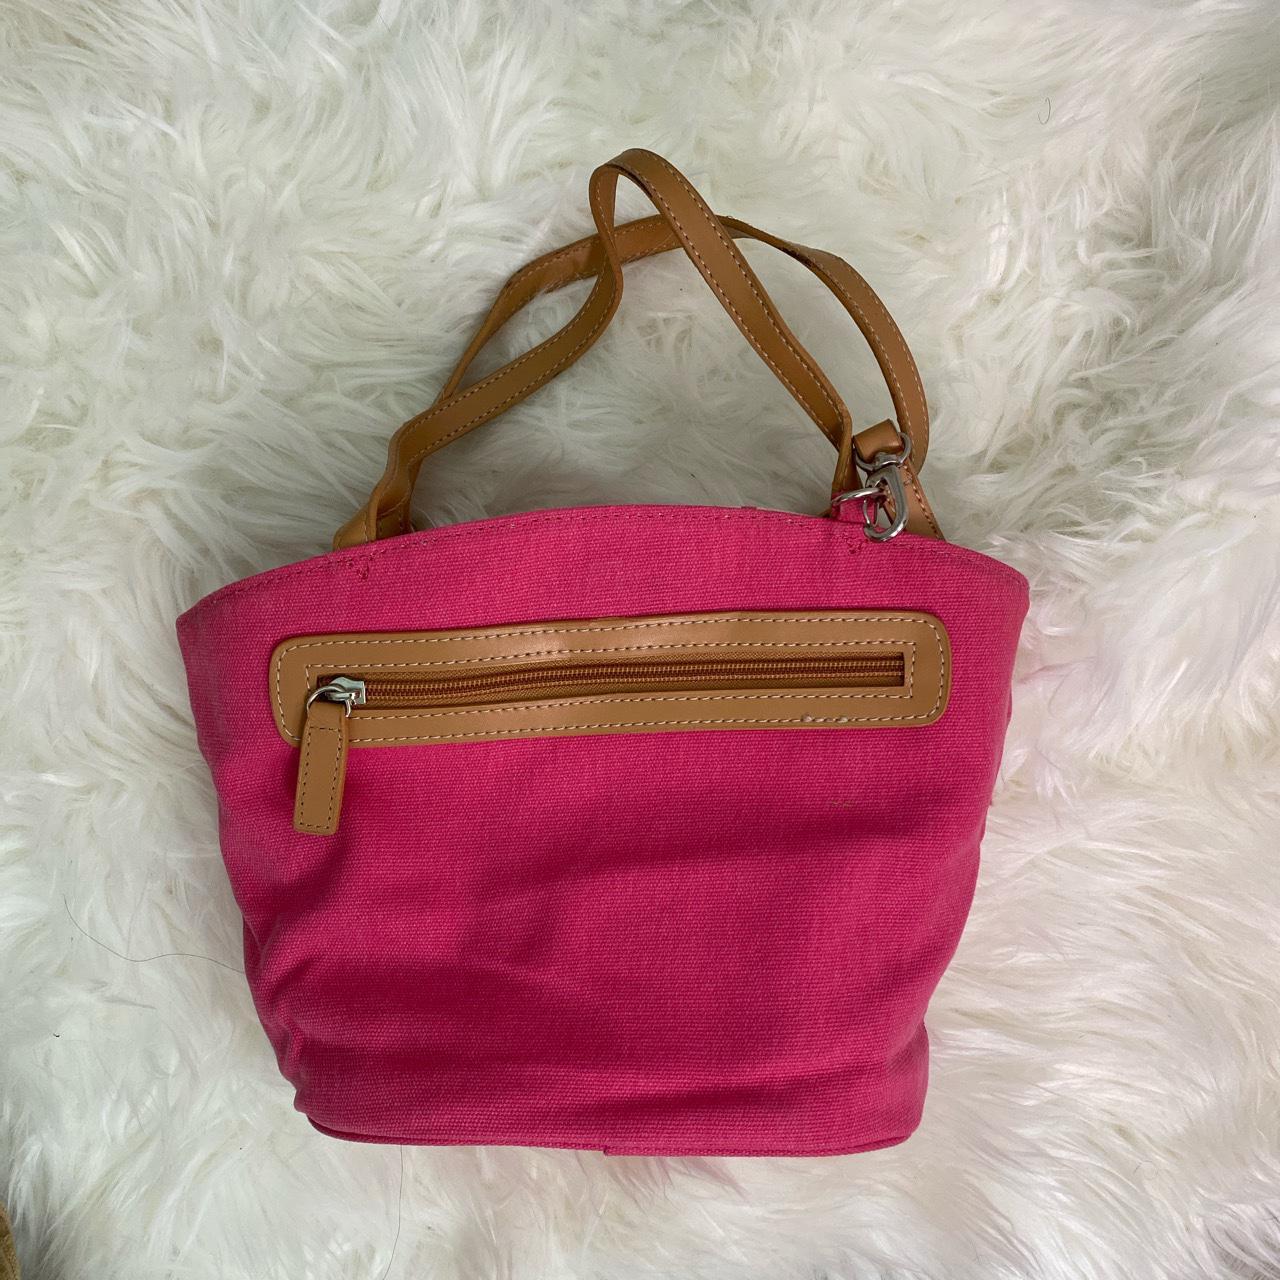 Sonoma Goods for Life Women's Pink and Tan Bag | Depop